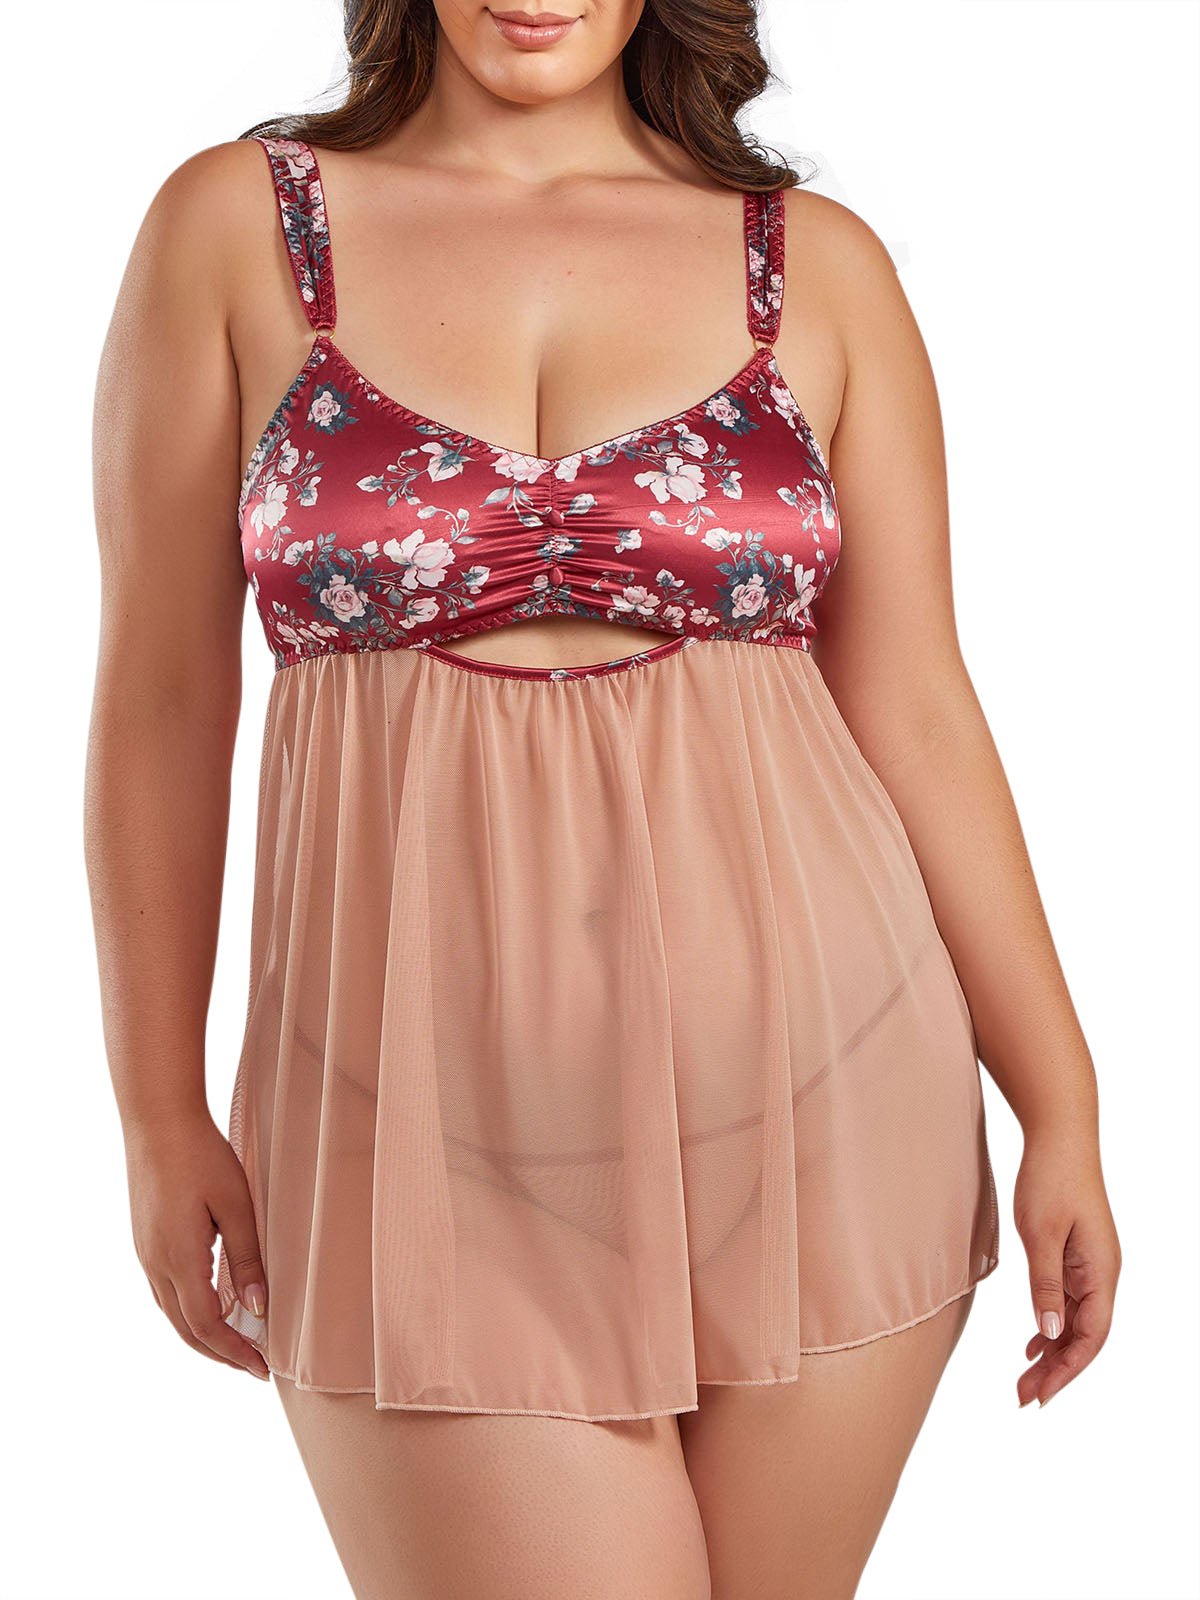 iCollection Babydoll Women&#39;s Brittany Plus Size Babydoll Lingerie